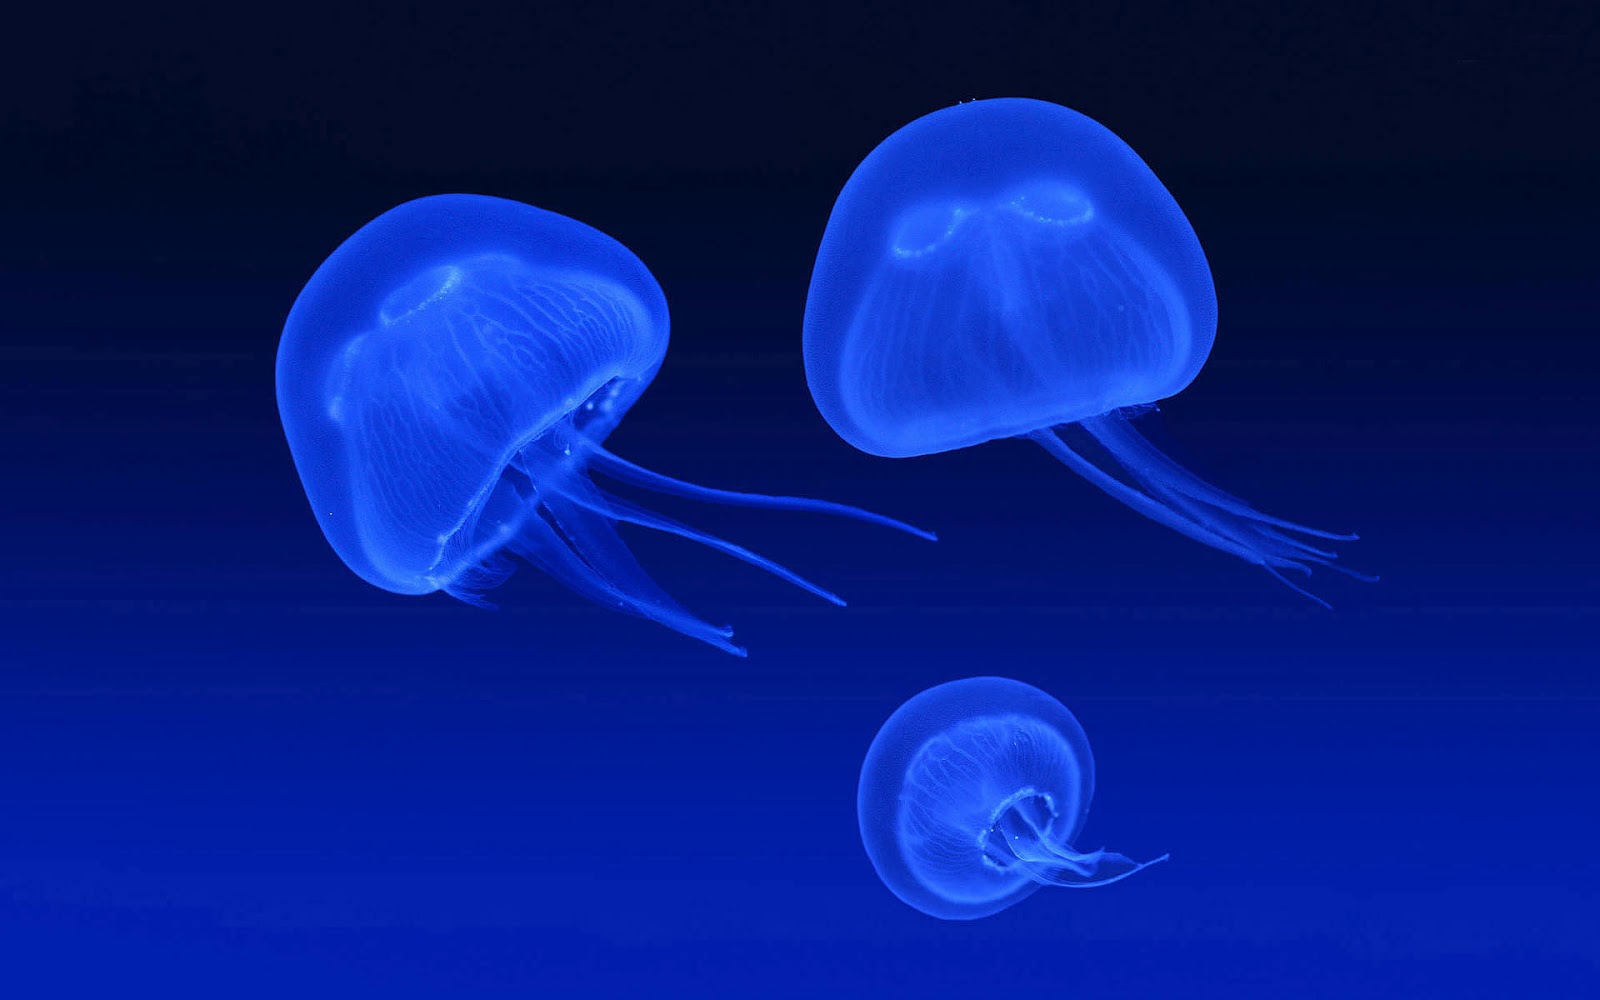 http://1.bp.blogspot.com/-Y3Bi4W1qtBw/UDkR6SRr3cI/AAAAAAAABH0/P48xRcw6gzA/s1600/hd-jellyfish-wallpaper-with-blue-jellyfish-swimming-underwater-jellyfish-wallpapers-backgrounds-pictures-paos.jpg